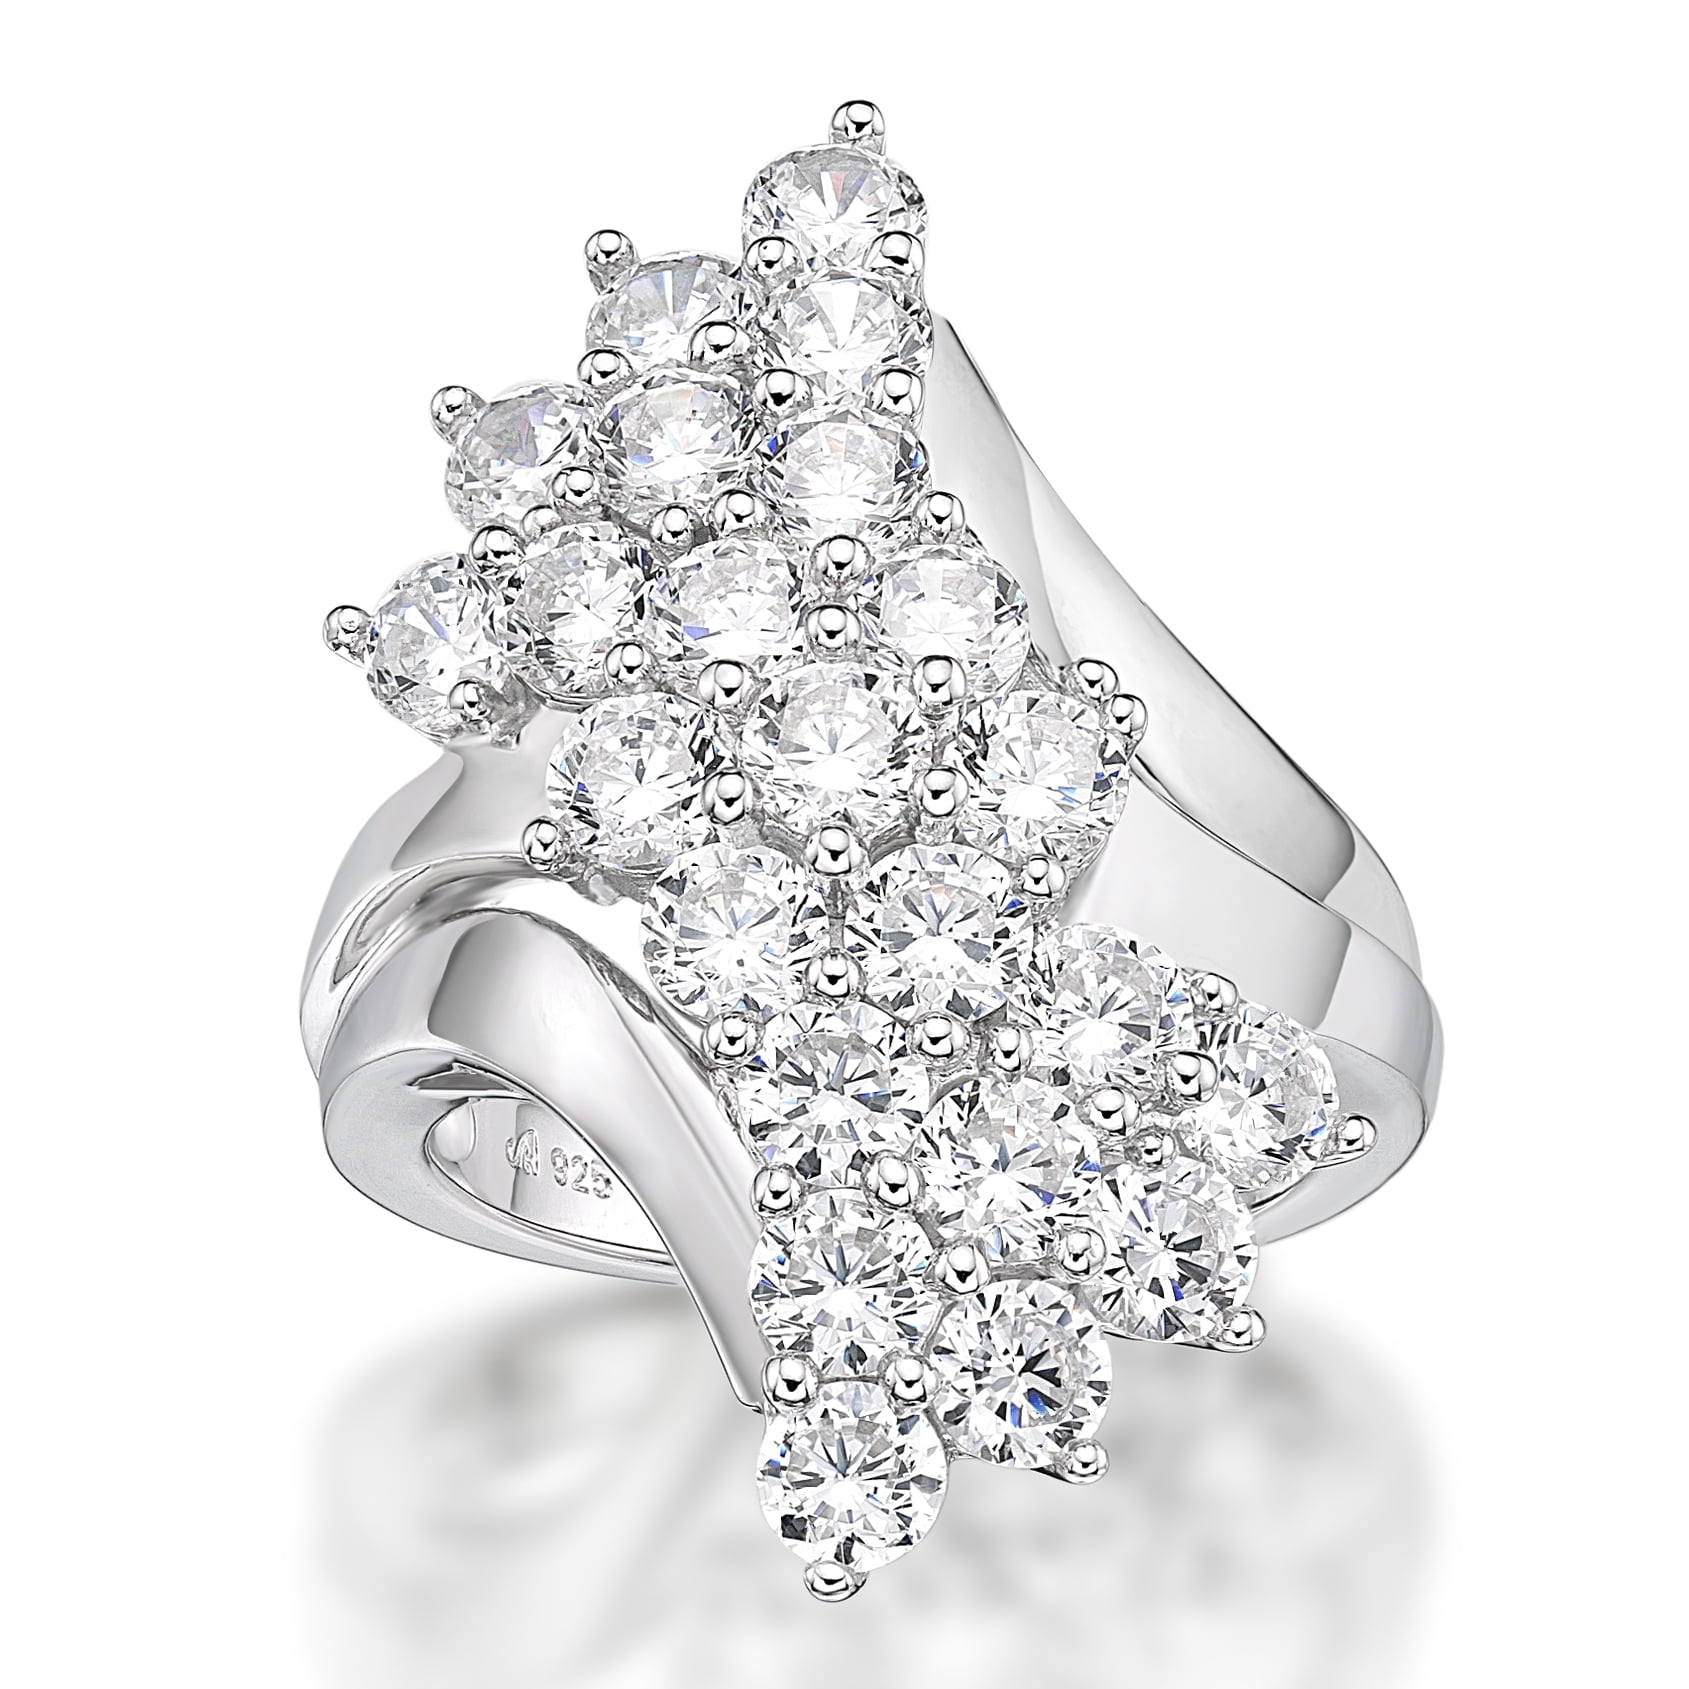 Vintage style diamond cocktail ring in 14k white gold – Charles Babb Designs